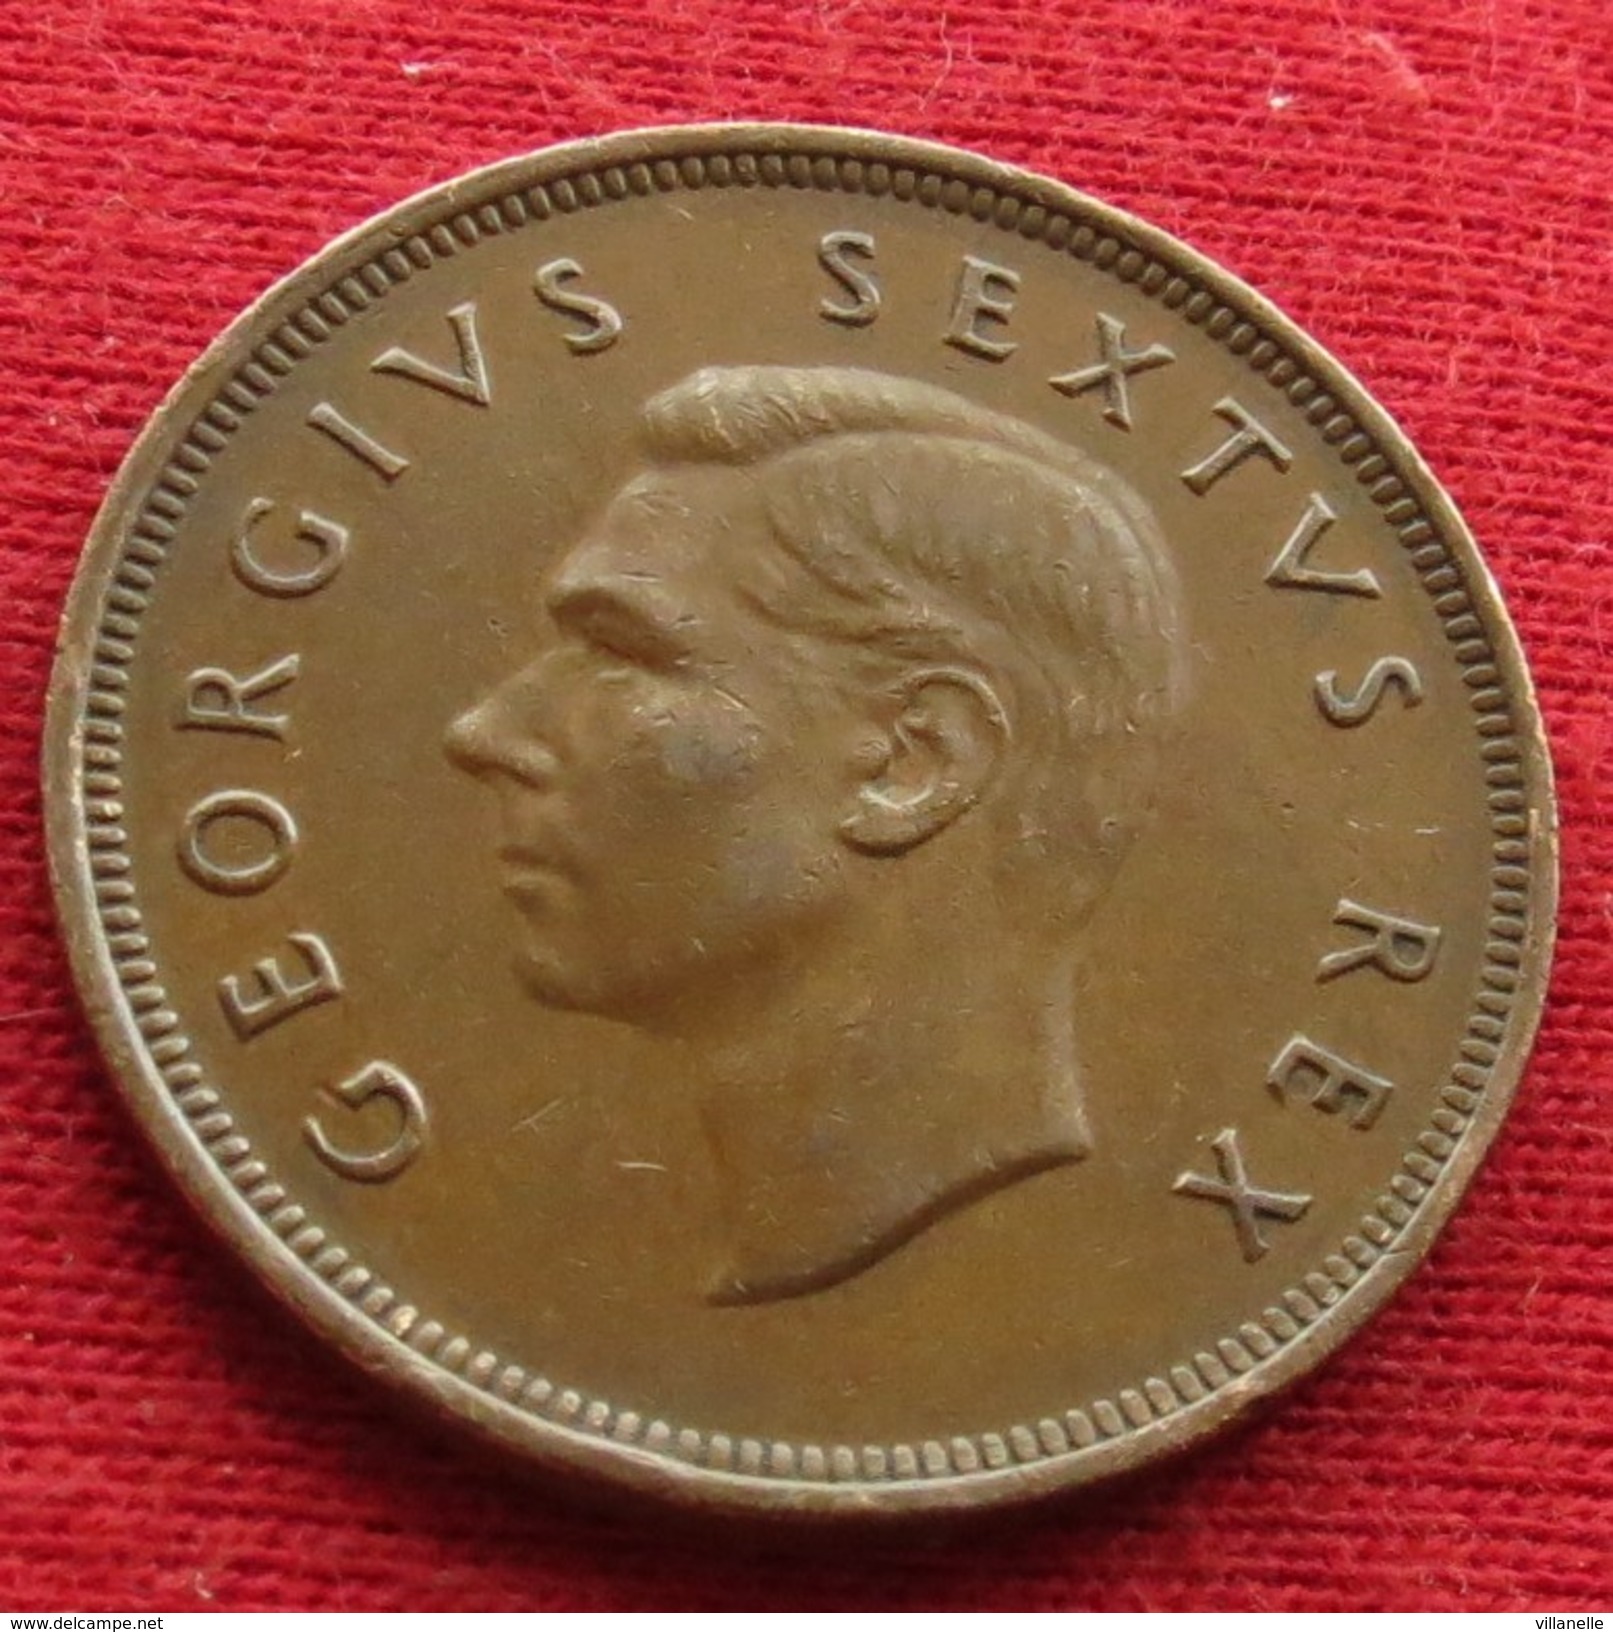 South Africa 1 One Penny 1951 KM# 34.2 Africa Do Sul RSA Afrique Do Sud Afrika - South Africa